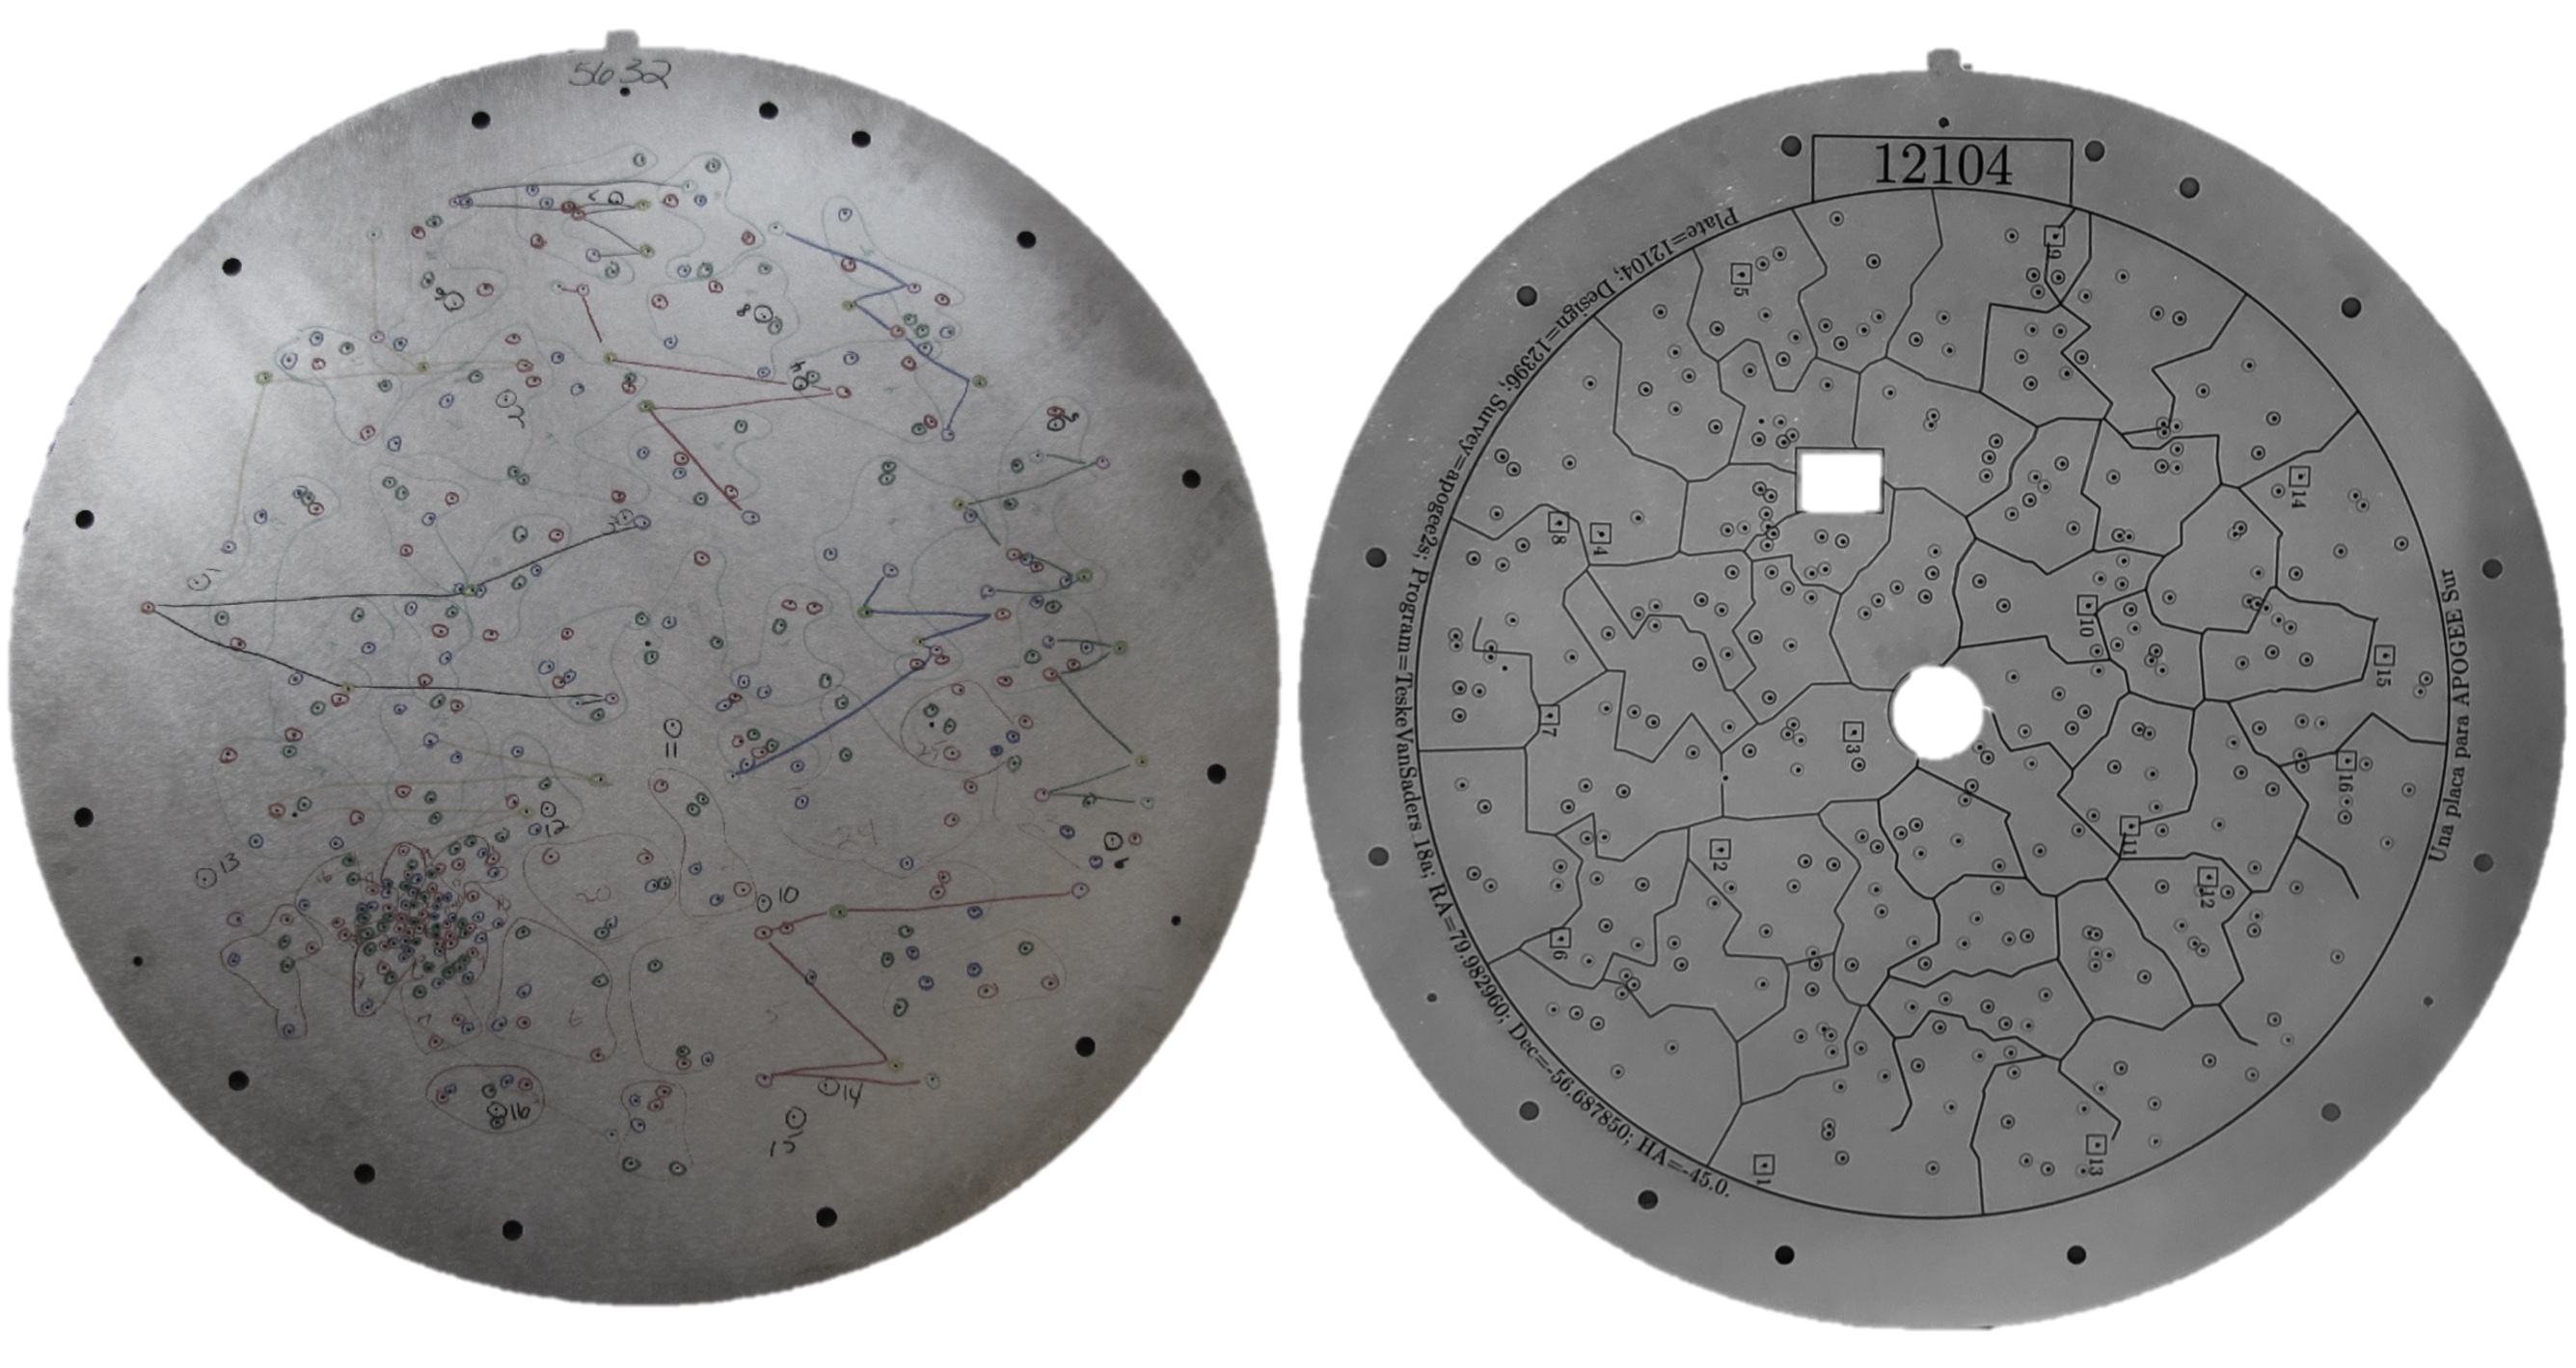  Example plug plates for the APOGEE-N (left) and APOGEE-S (right) instruments. The plates are the same physical size, but due to the focal ratio of the respective telescopes, the plates have a different plate scale and span different angular extents on the sky. The APOGEE-N plates are marked by hand, whereas the APOGEE-S plates are machine labeled.   